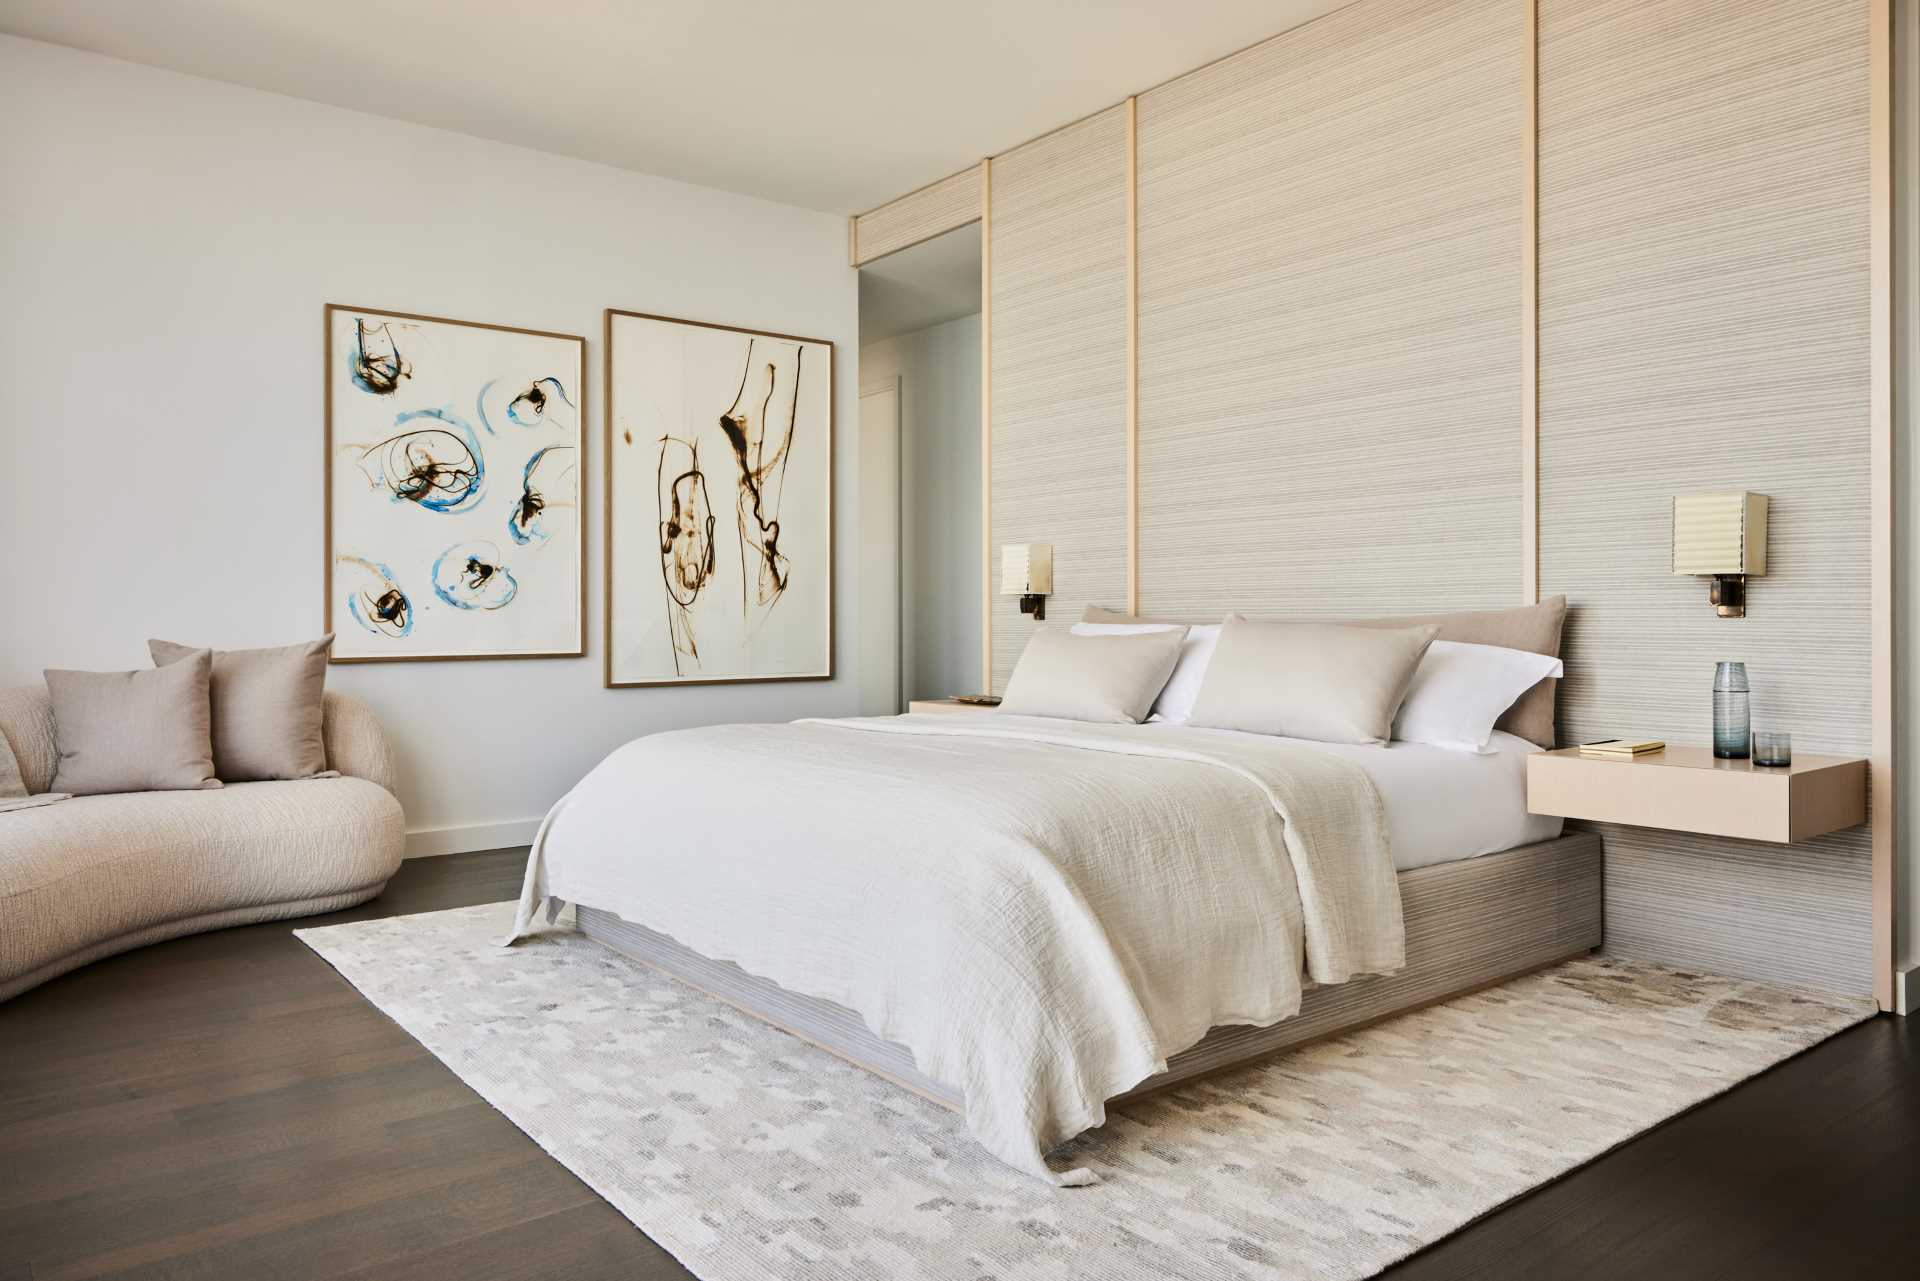 A modern bedroom with a neutral color palette and small sitting area.